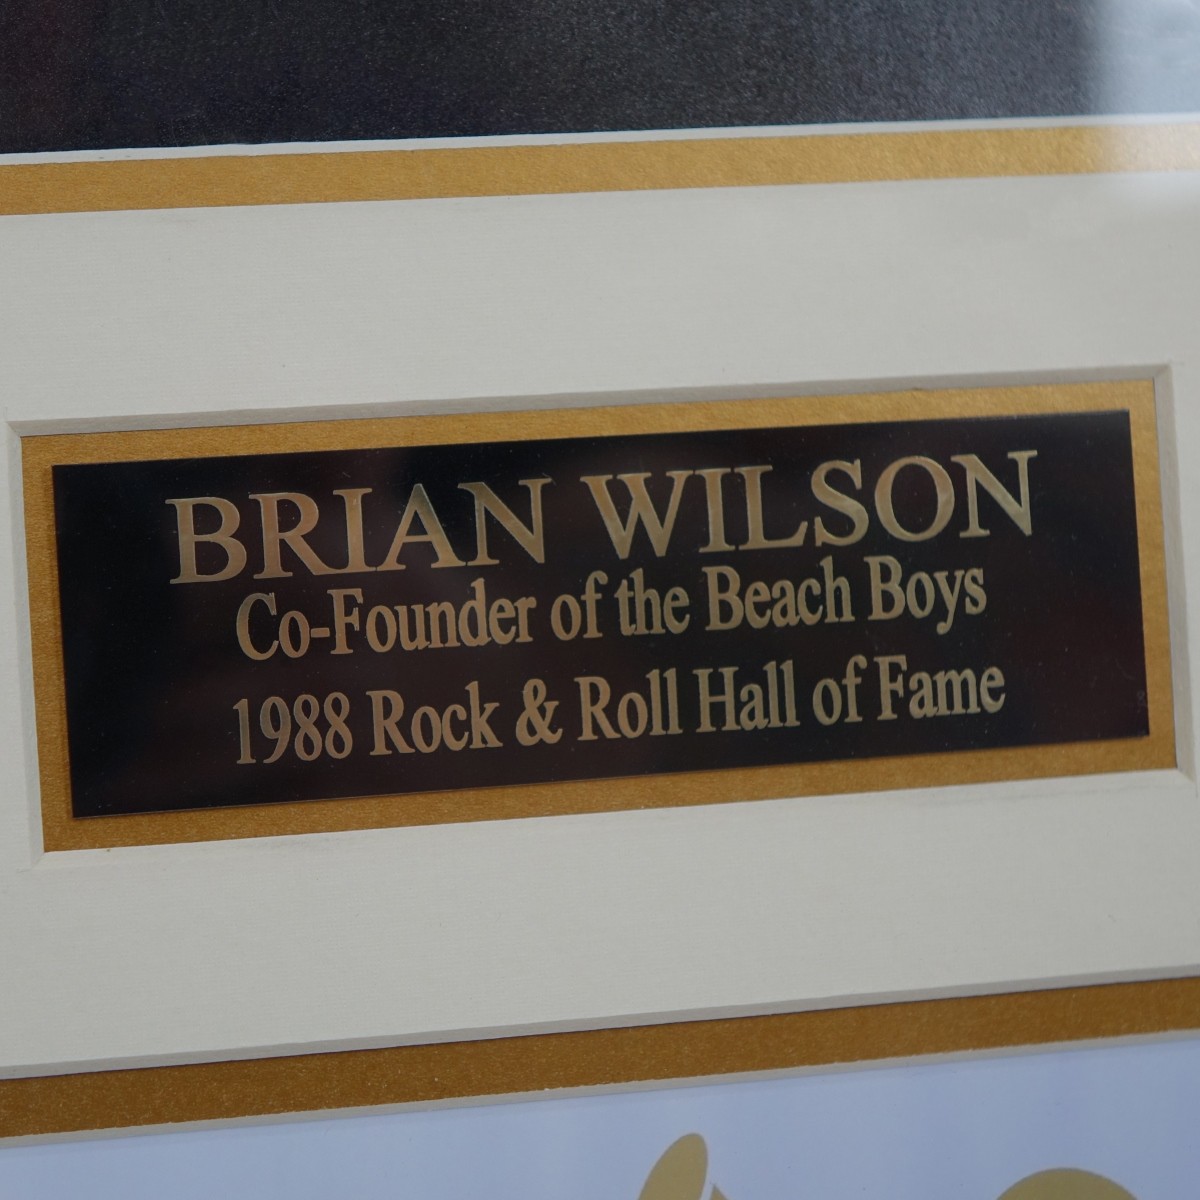 Brian Wilson Signed Photographs